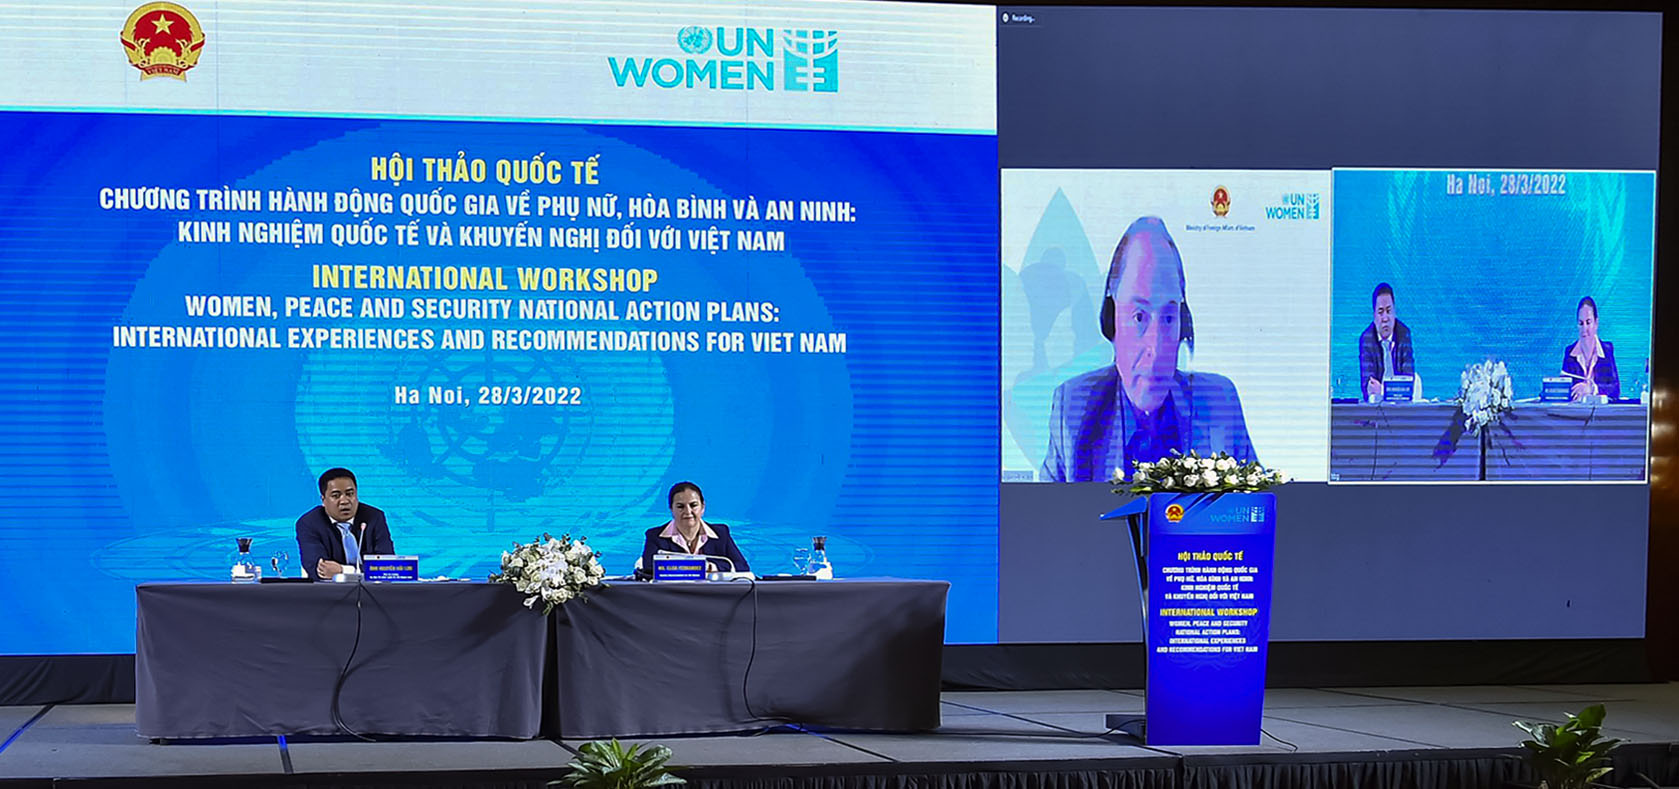 The international workshop to discuss how to accelerate the development of a National Action Plan on WPS for Viet Nam. Photo: MOFA